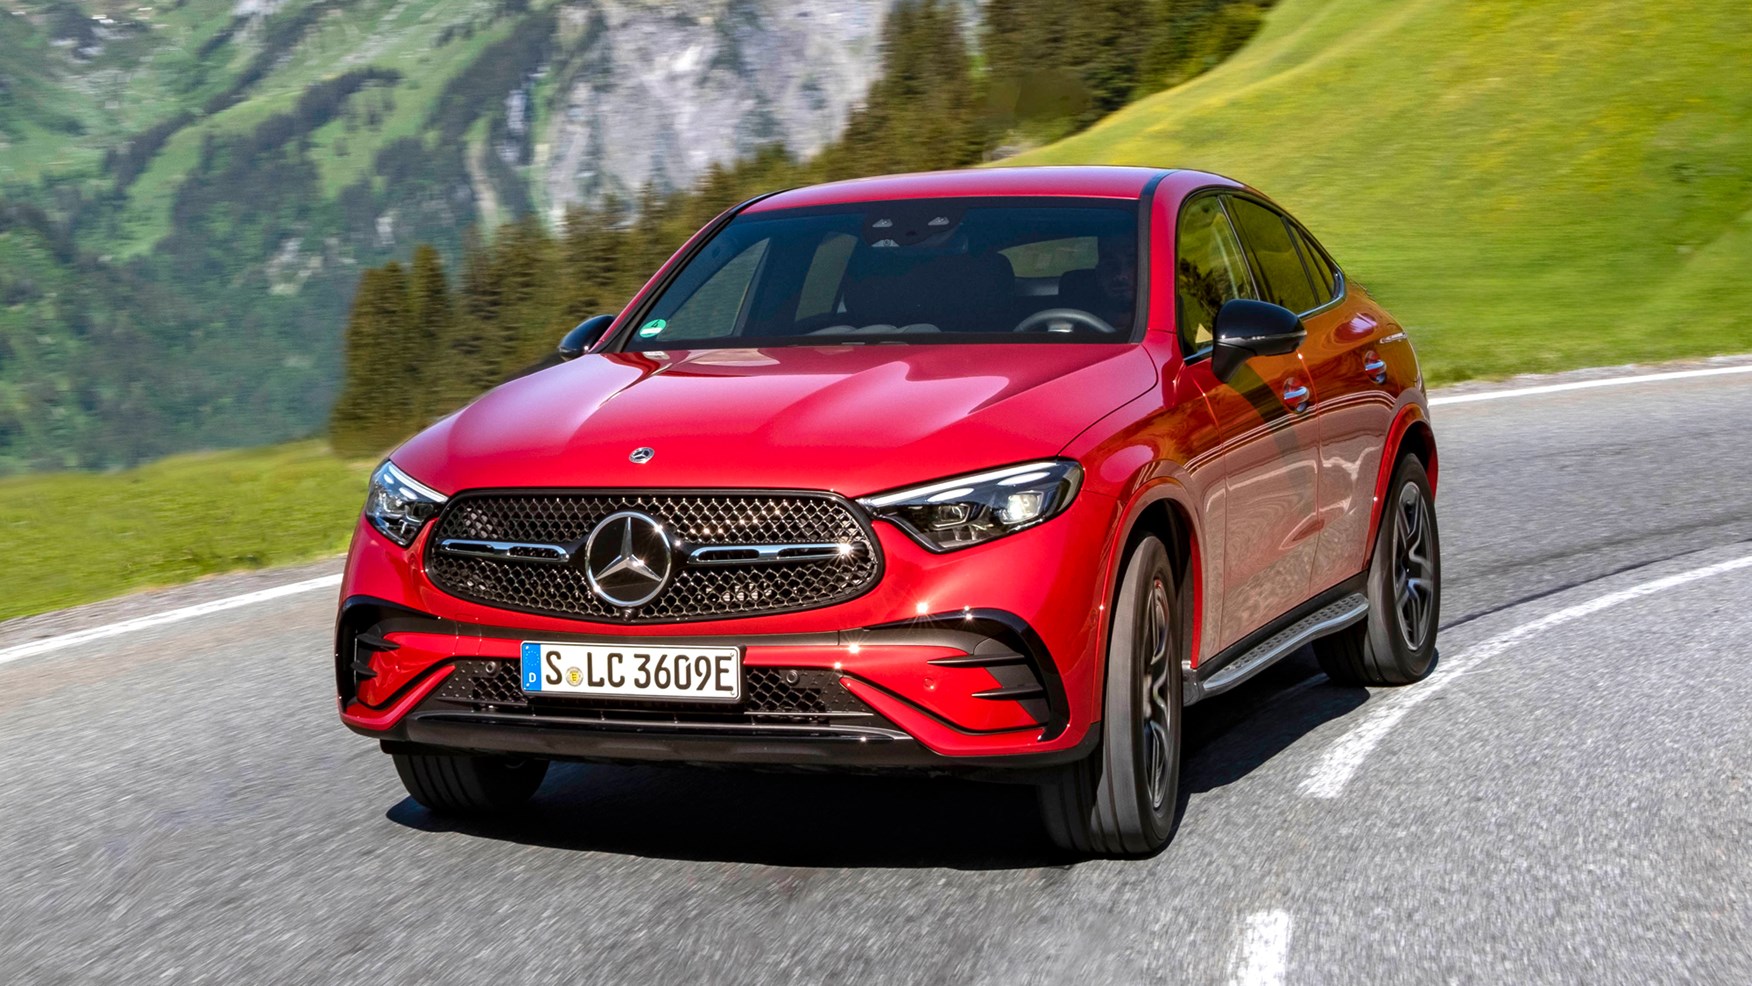 Mercedes GLC Coupe review: sacrificing substance for style